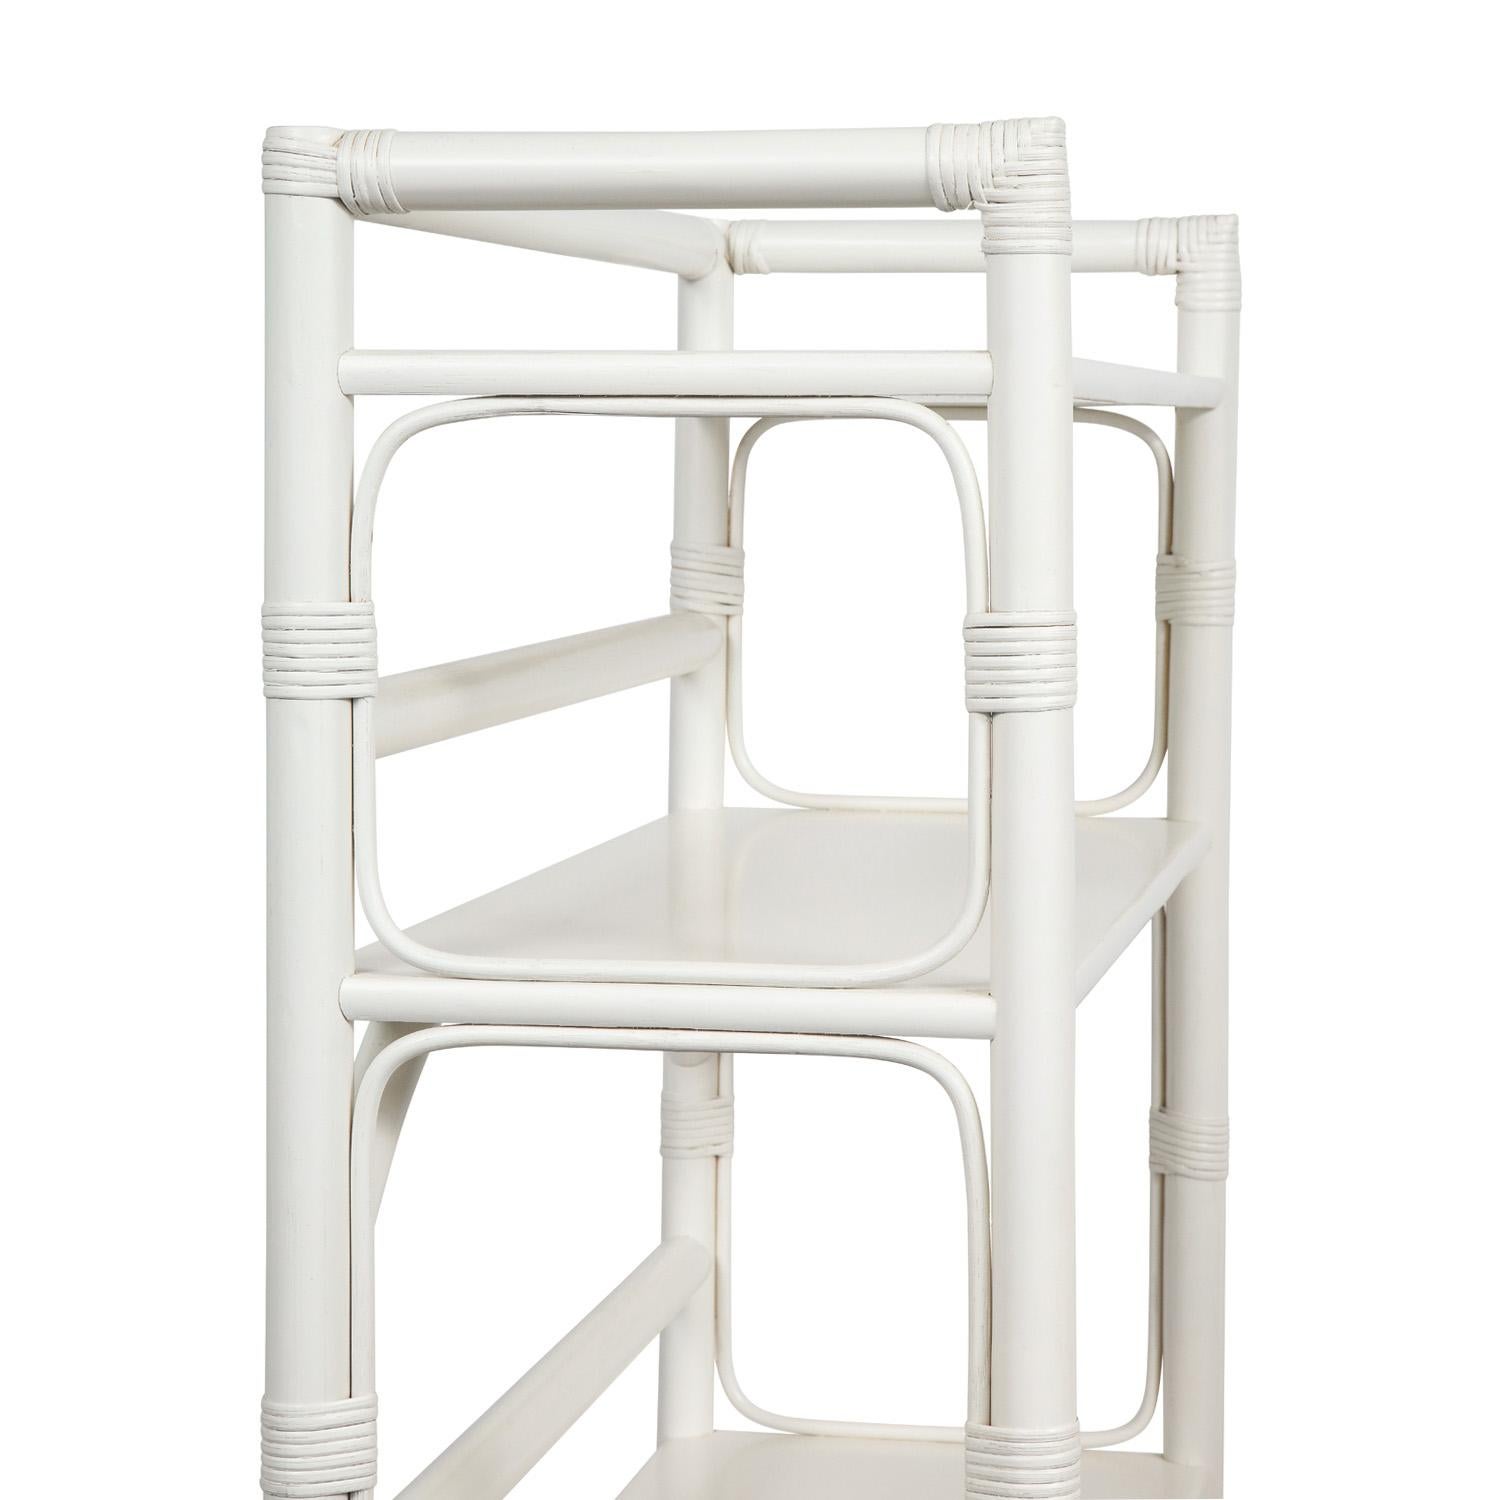 Hand-Crafted Tommi Parzinger White Lacquered Etagere With Brass Pulls, 1950s